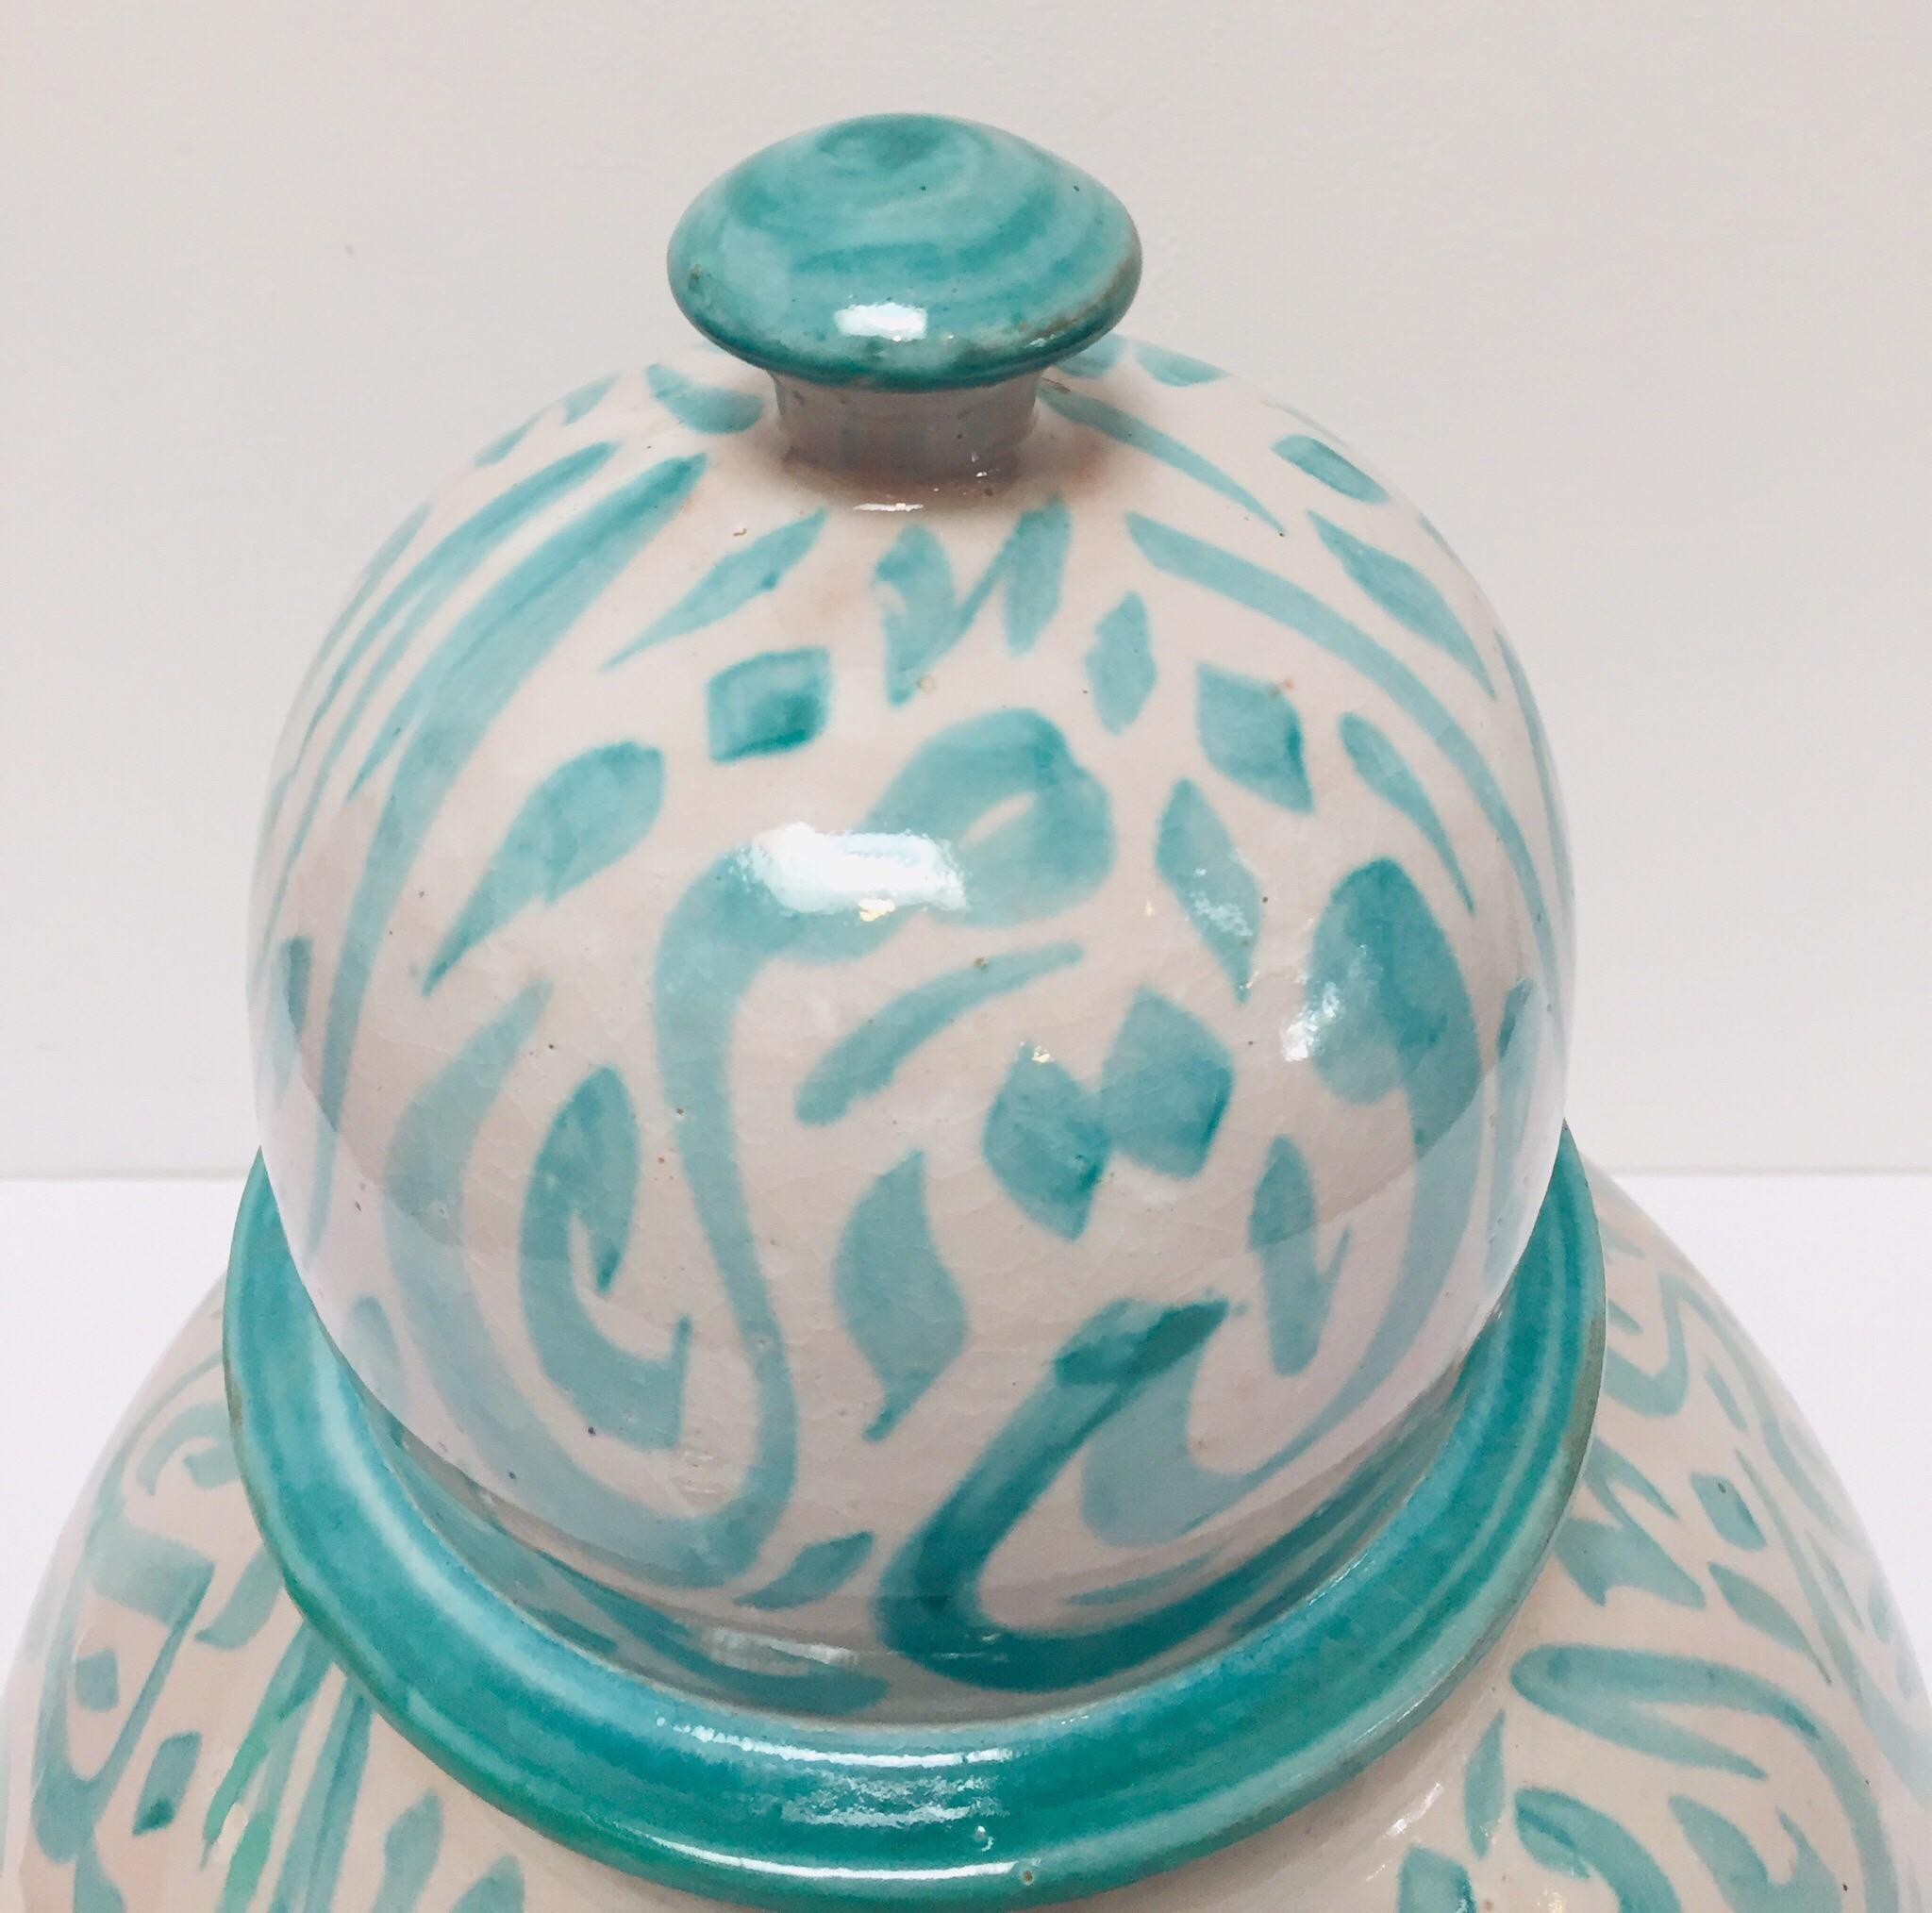 Moroccan Ceramic Lidded Urn from Fez with Arabic Calligraphy Lettrism Writing 2